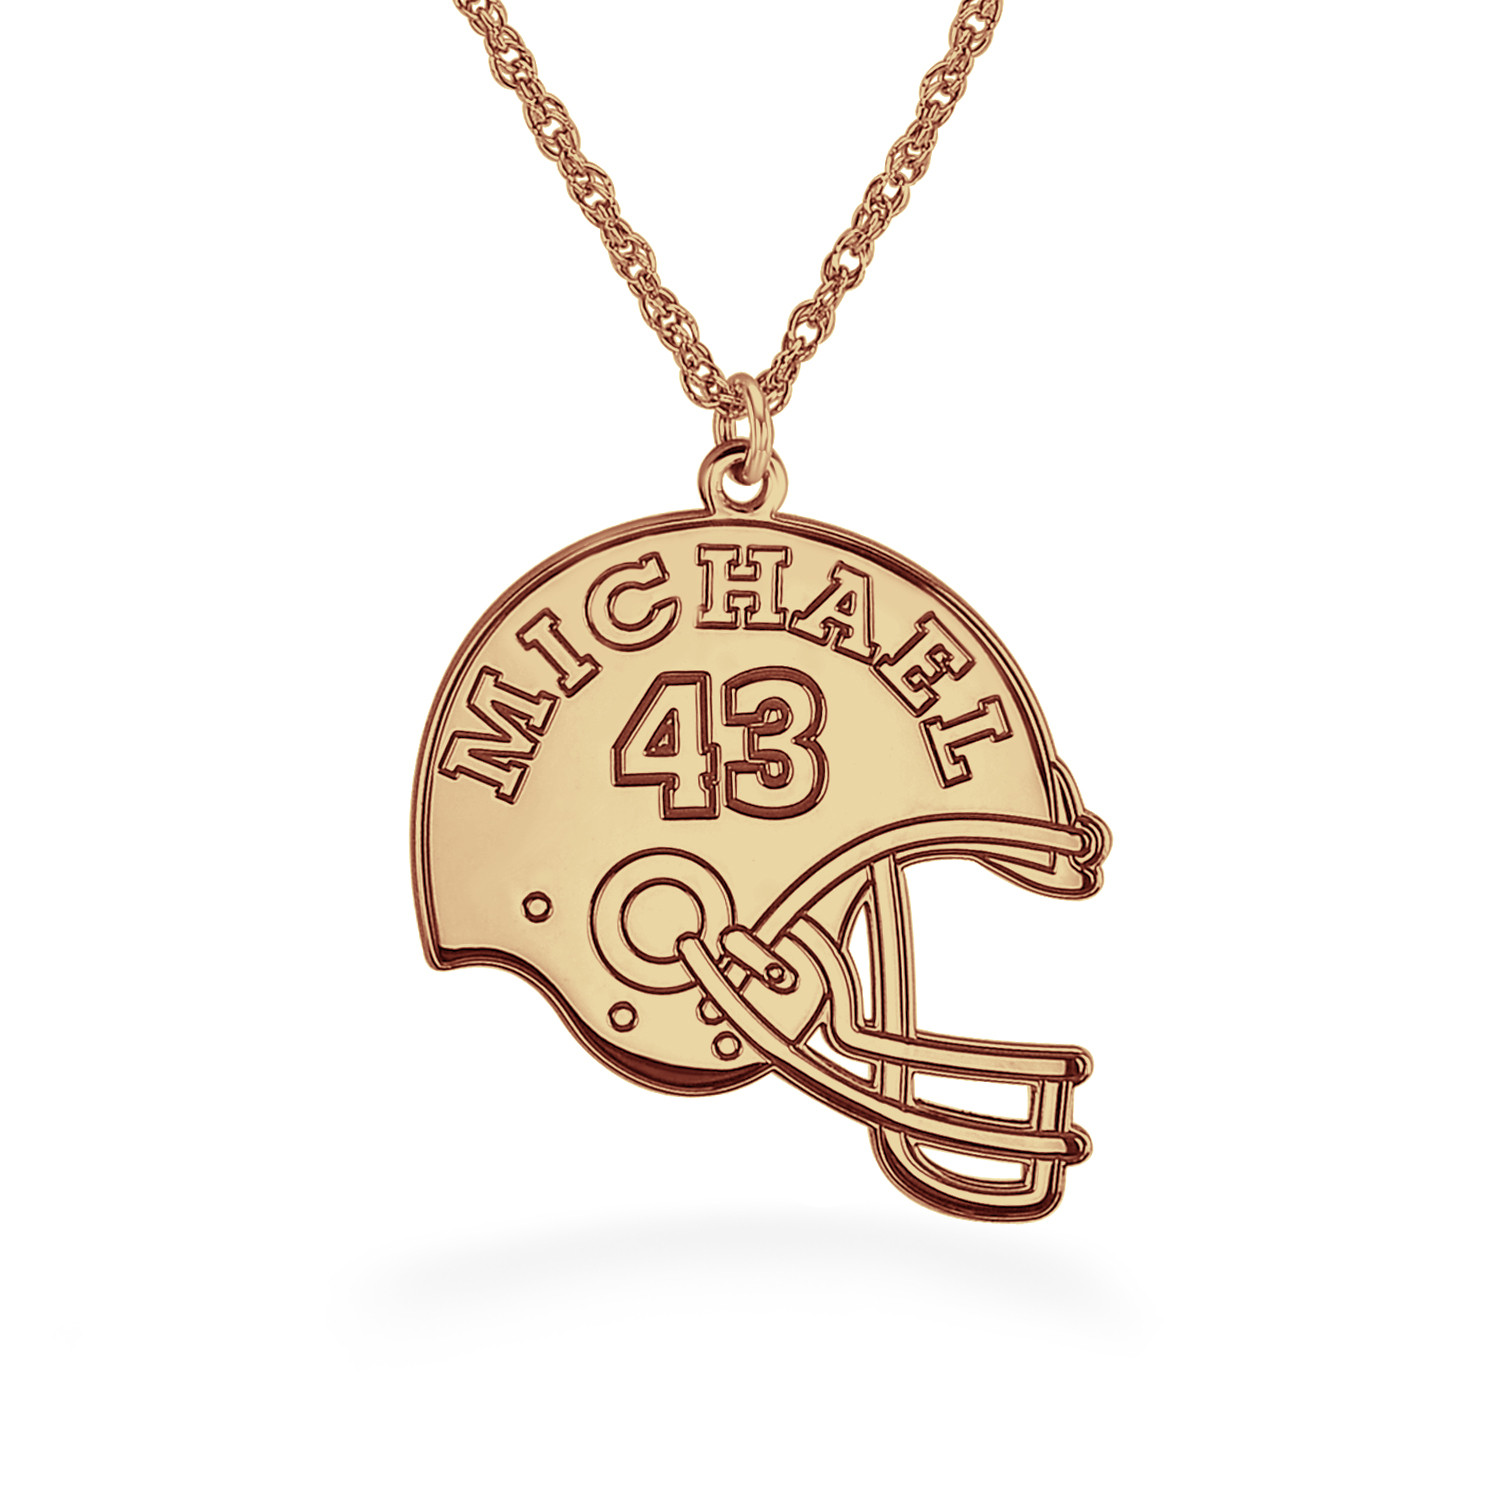 Details about   Baby stainless steel football and football helmet charm necklace. 